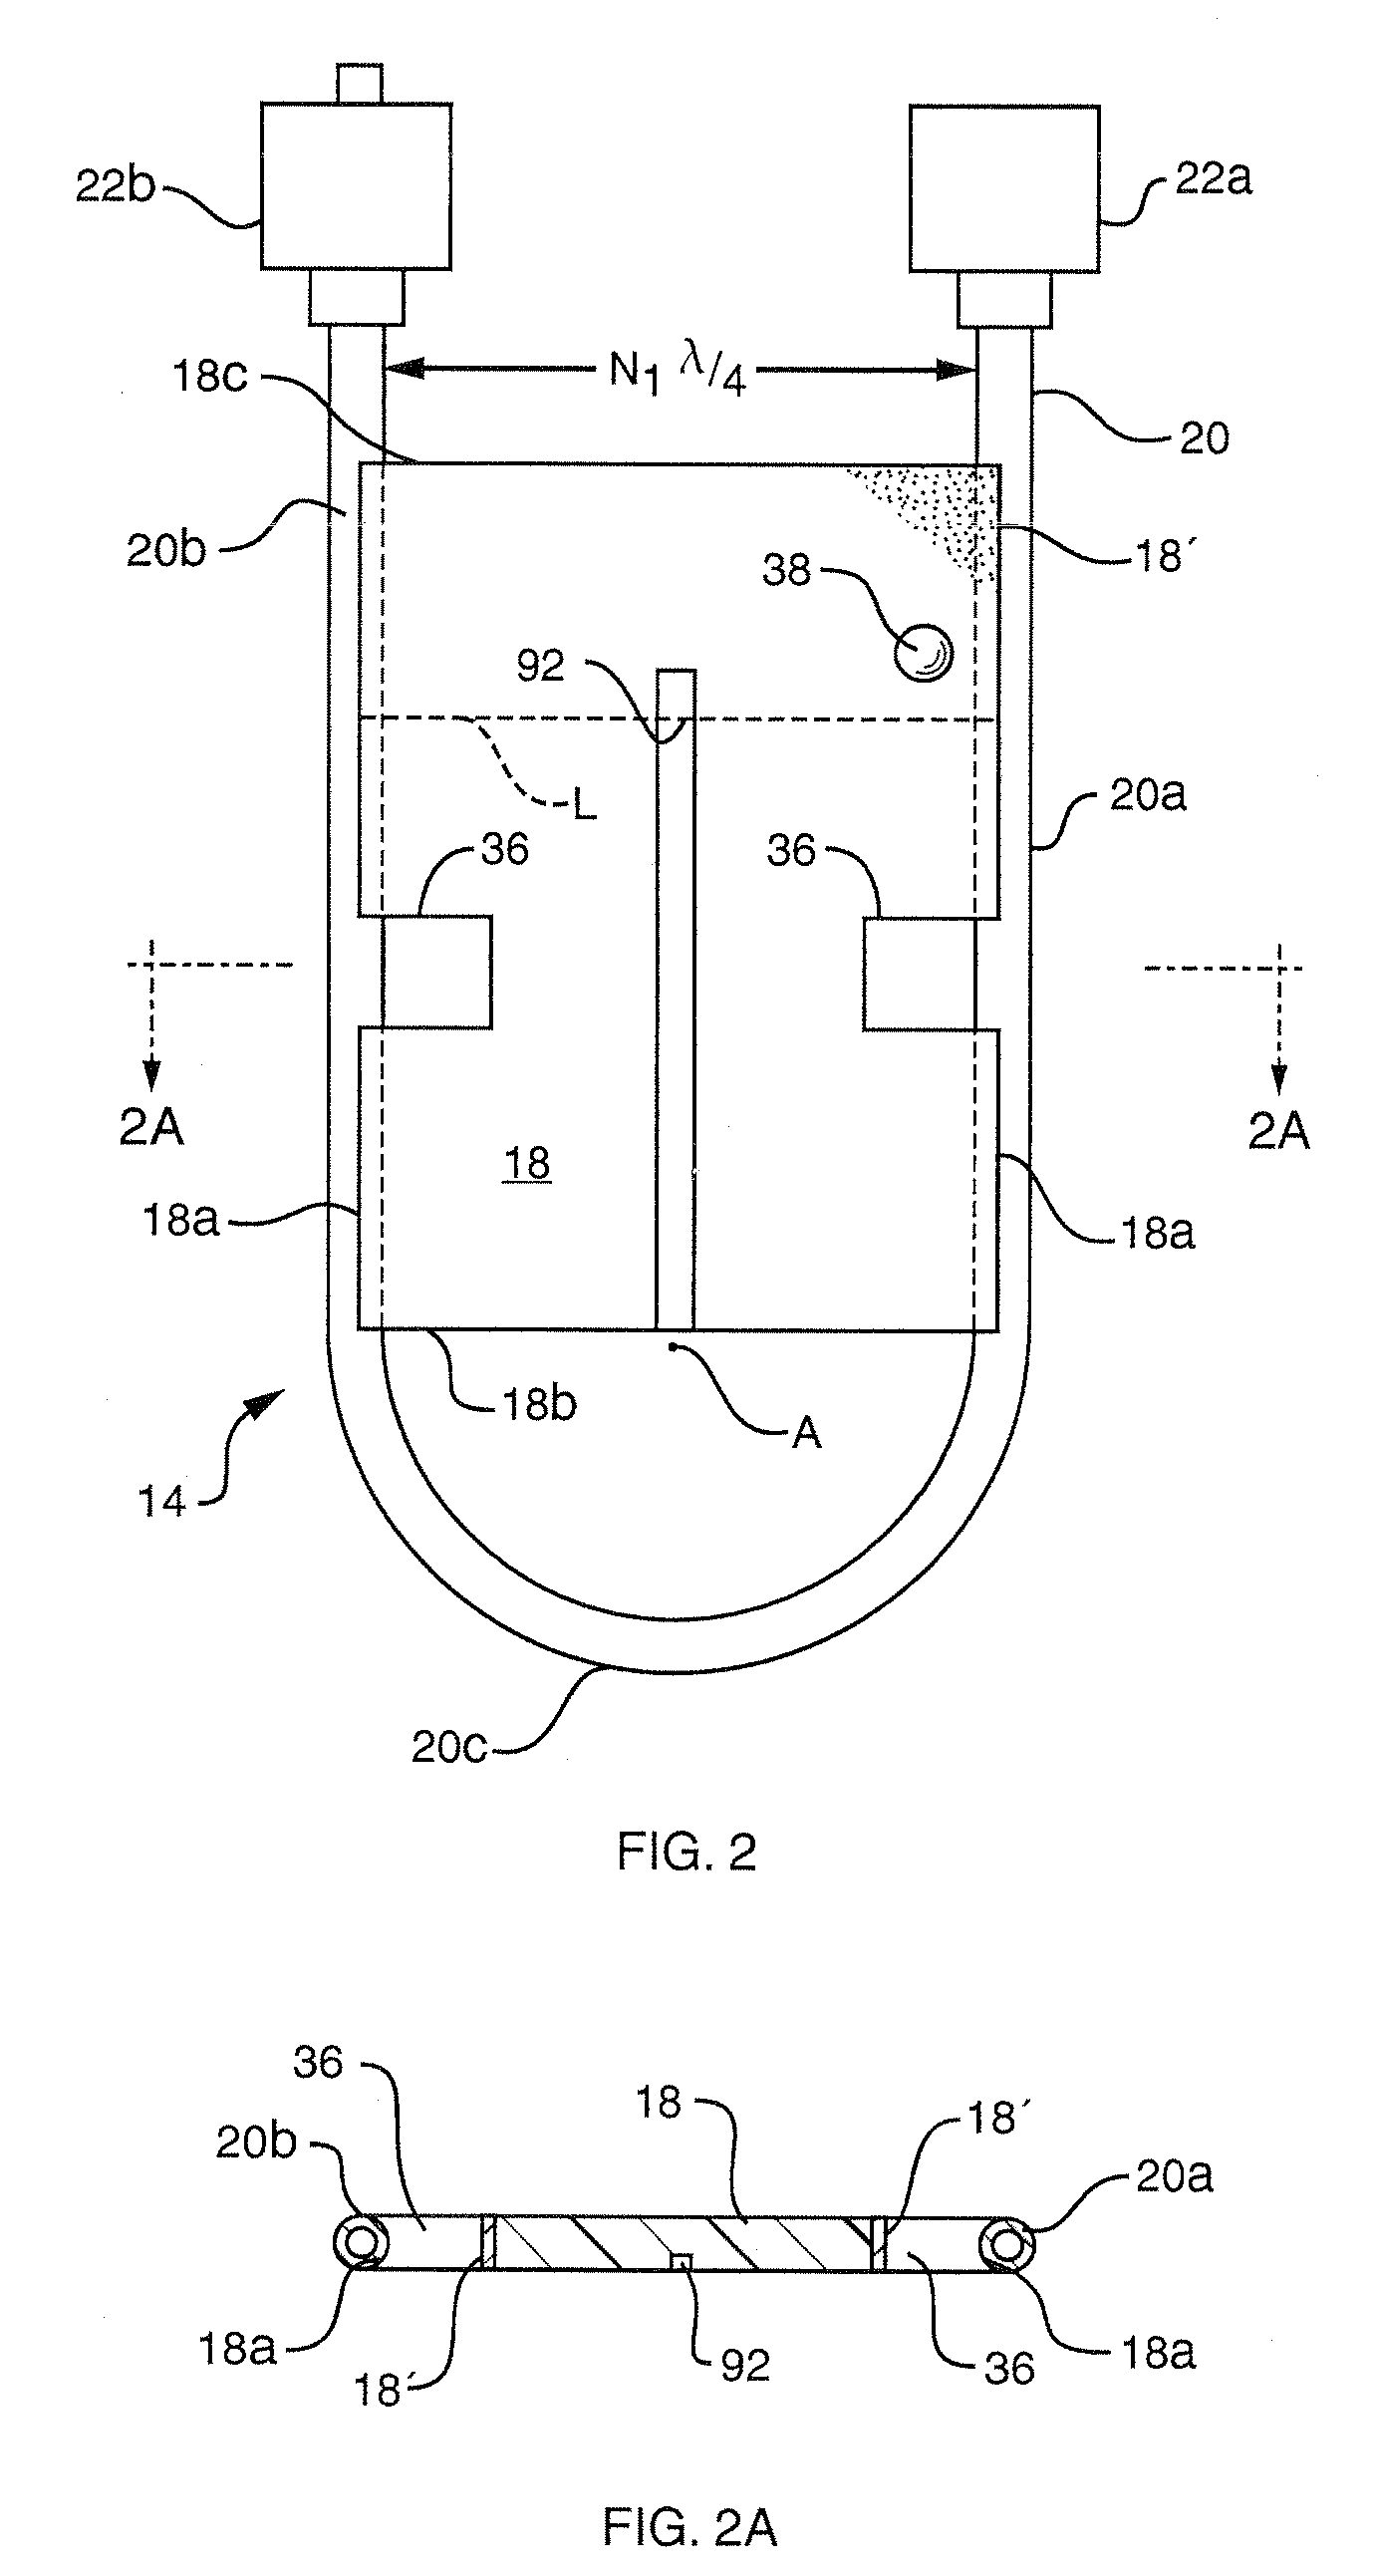 In-line microwave warming apparatus